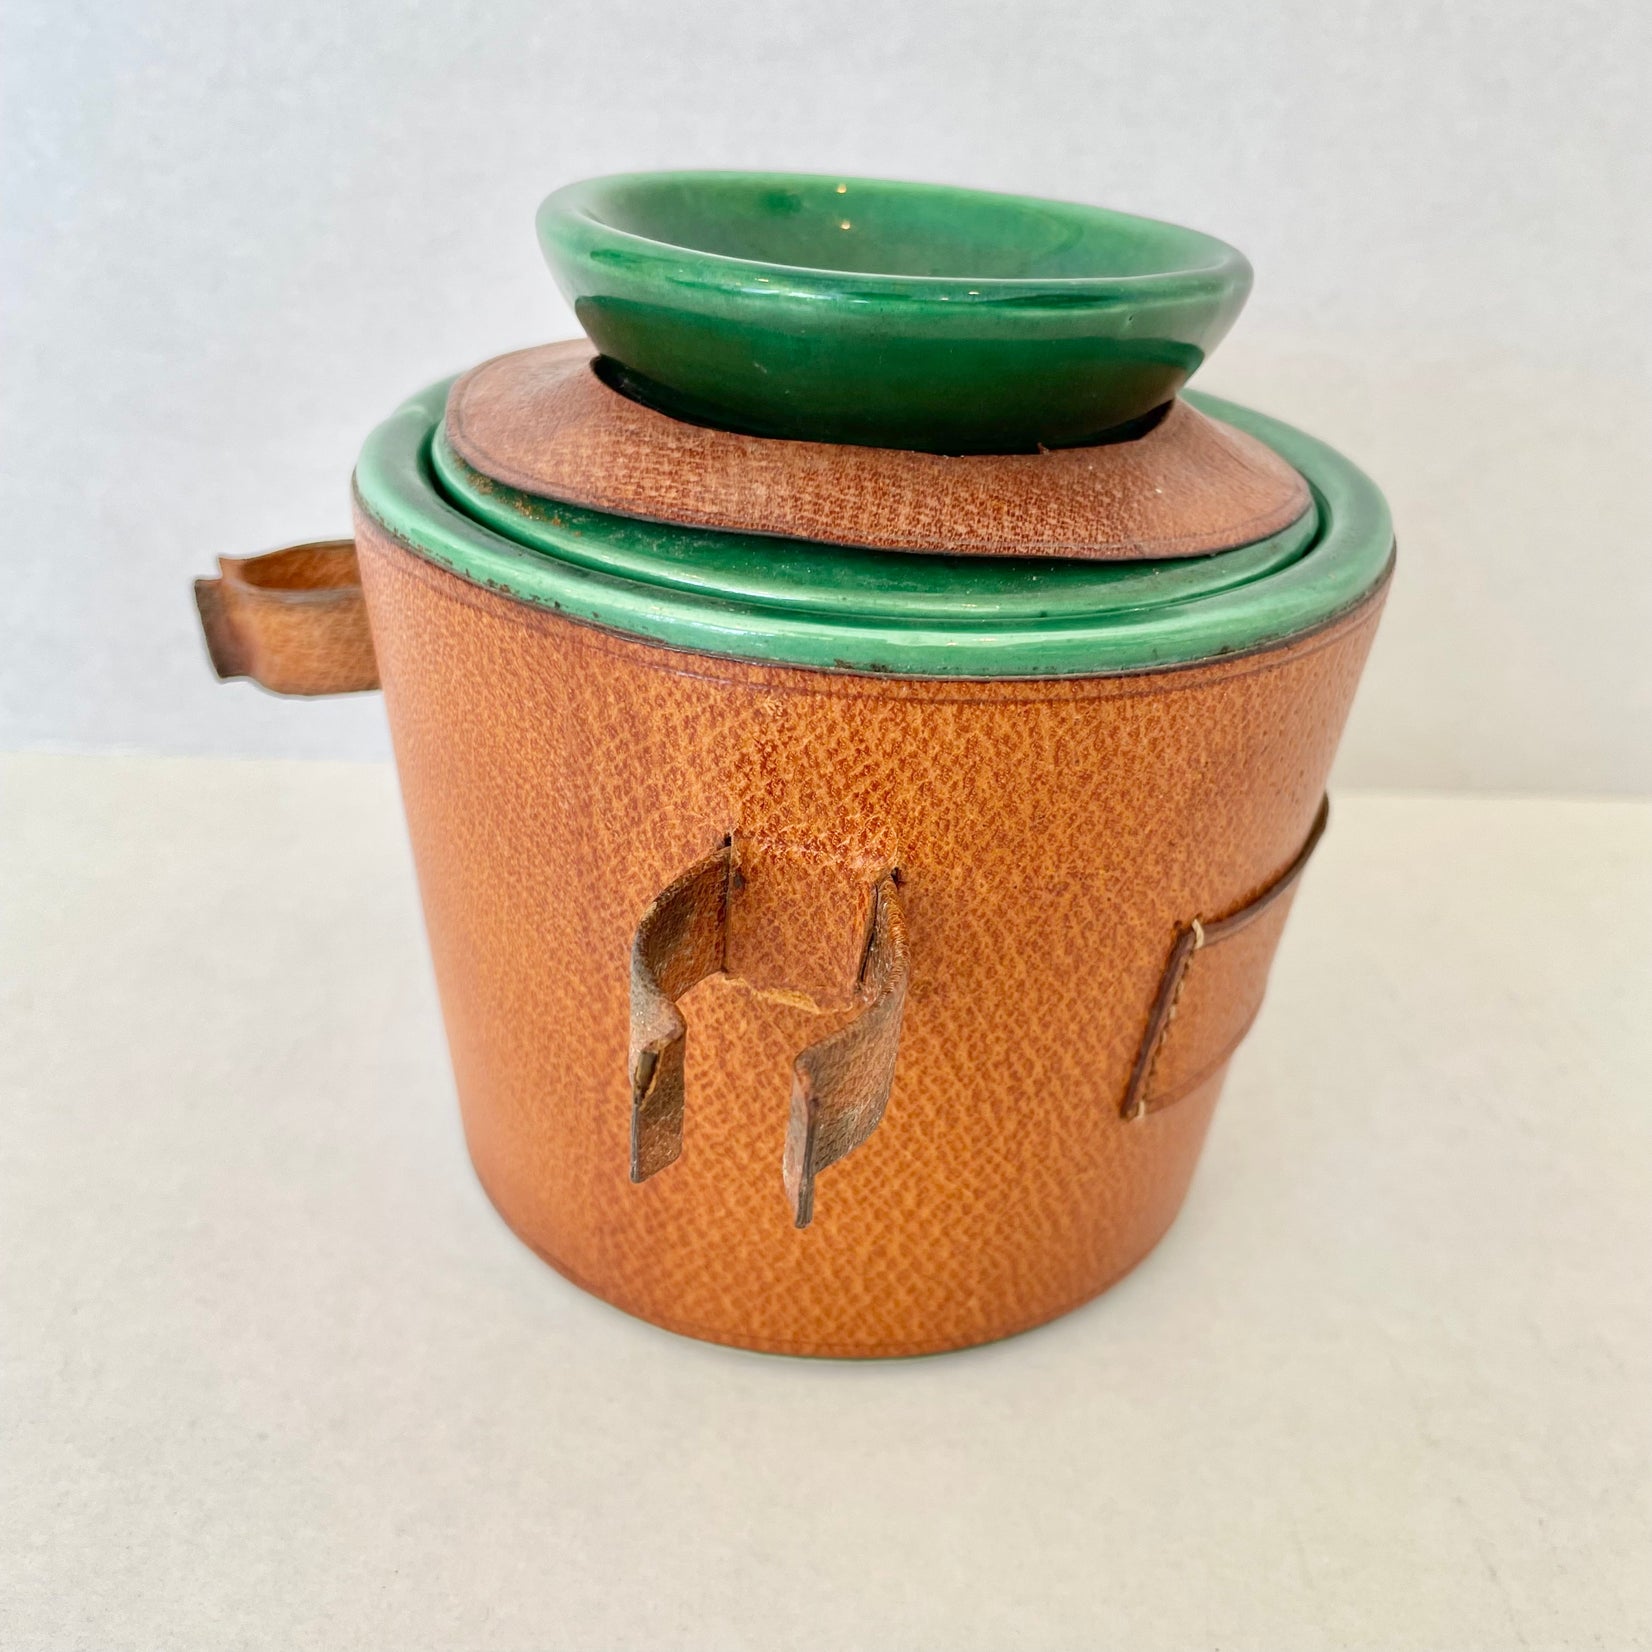 Leather and Ceramic Tobacco Jar by Longchamp